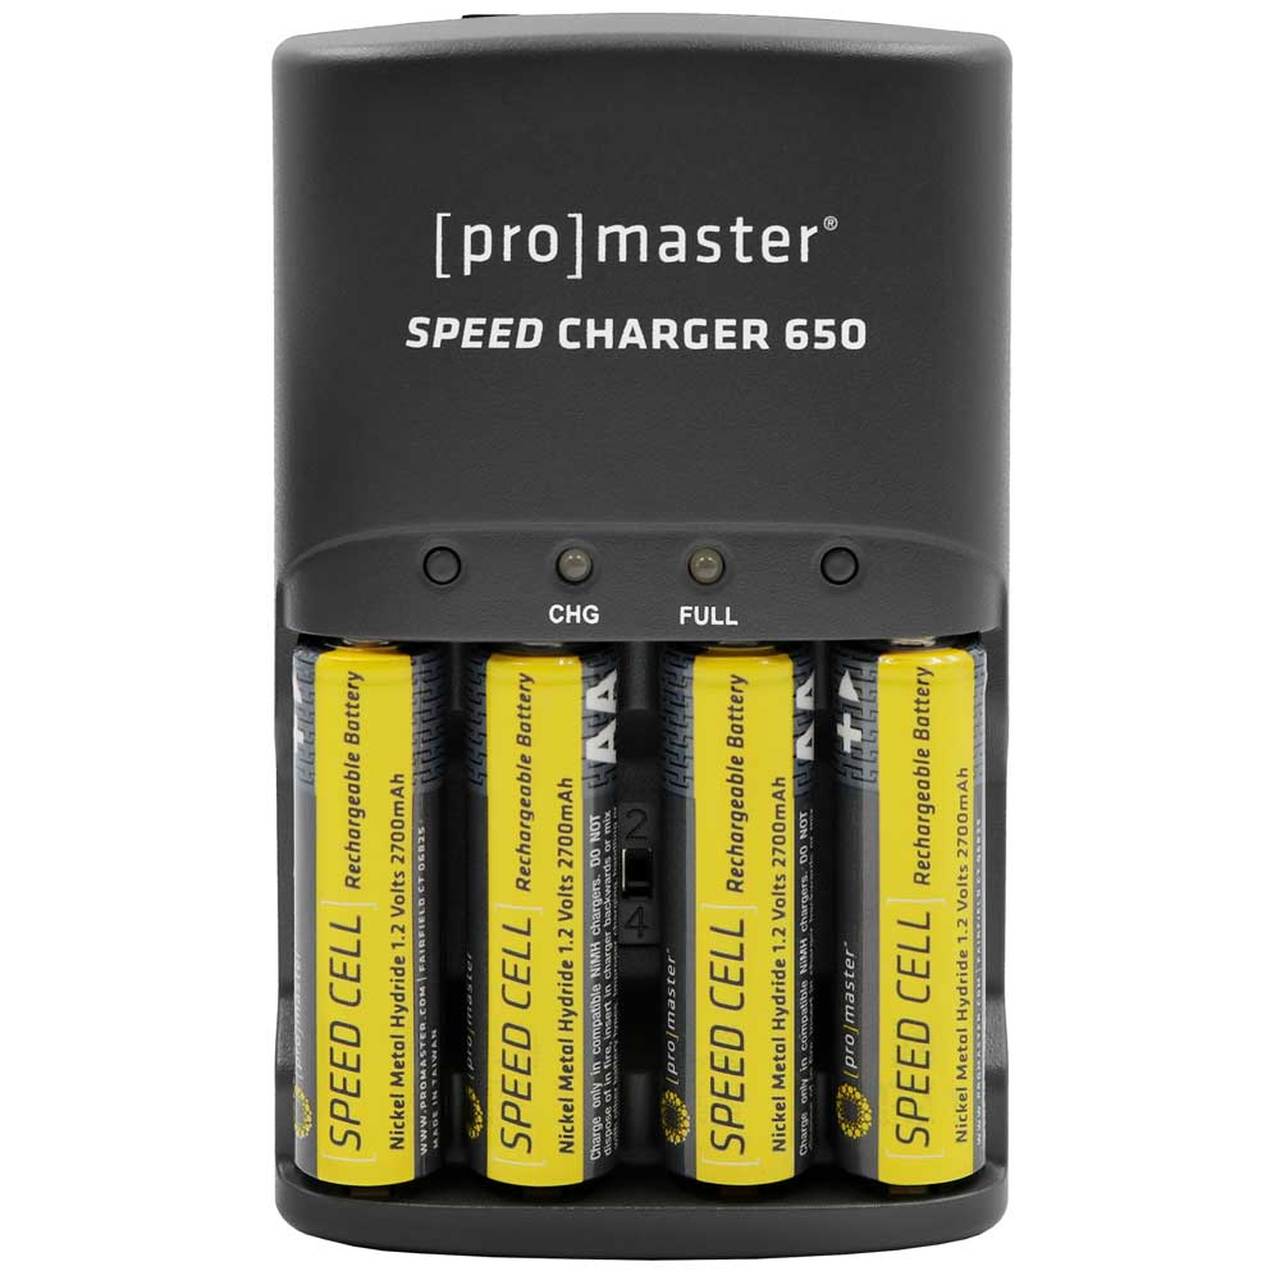 Promaster 1959 Speed Charger 650 AA NiMH Kit with 4 Batteries